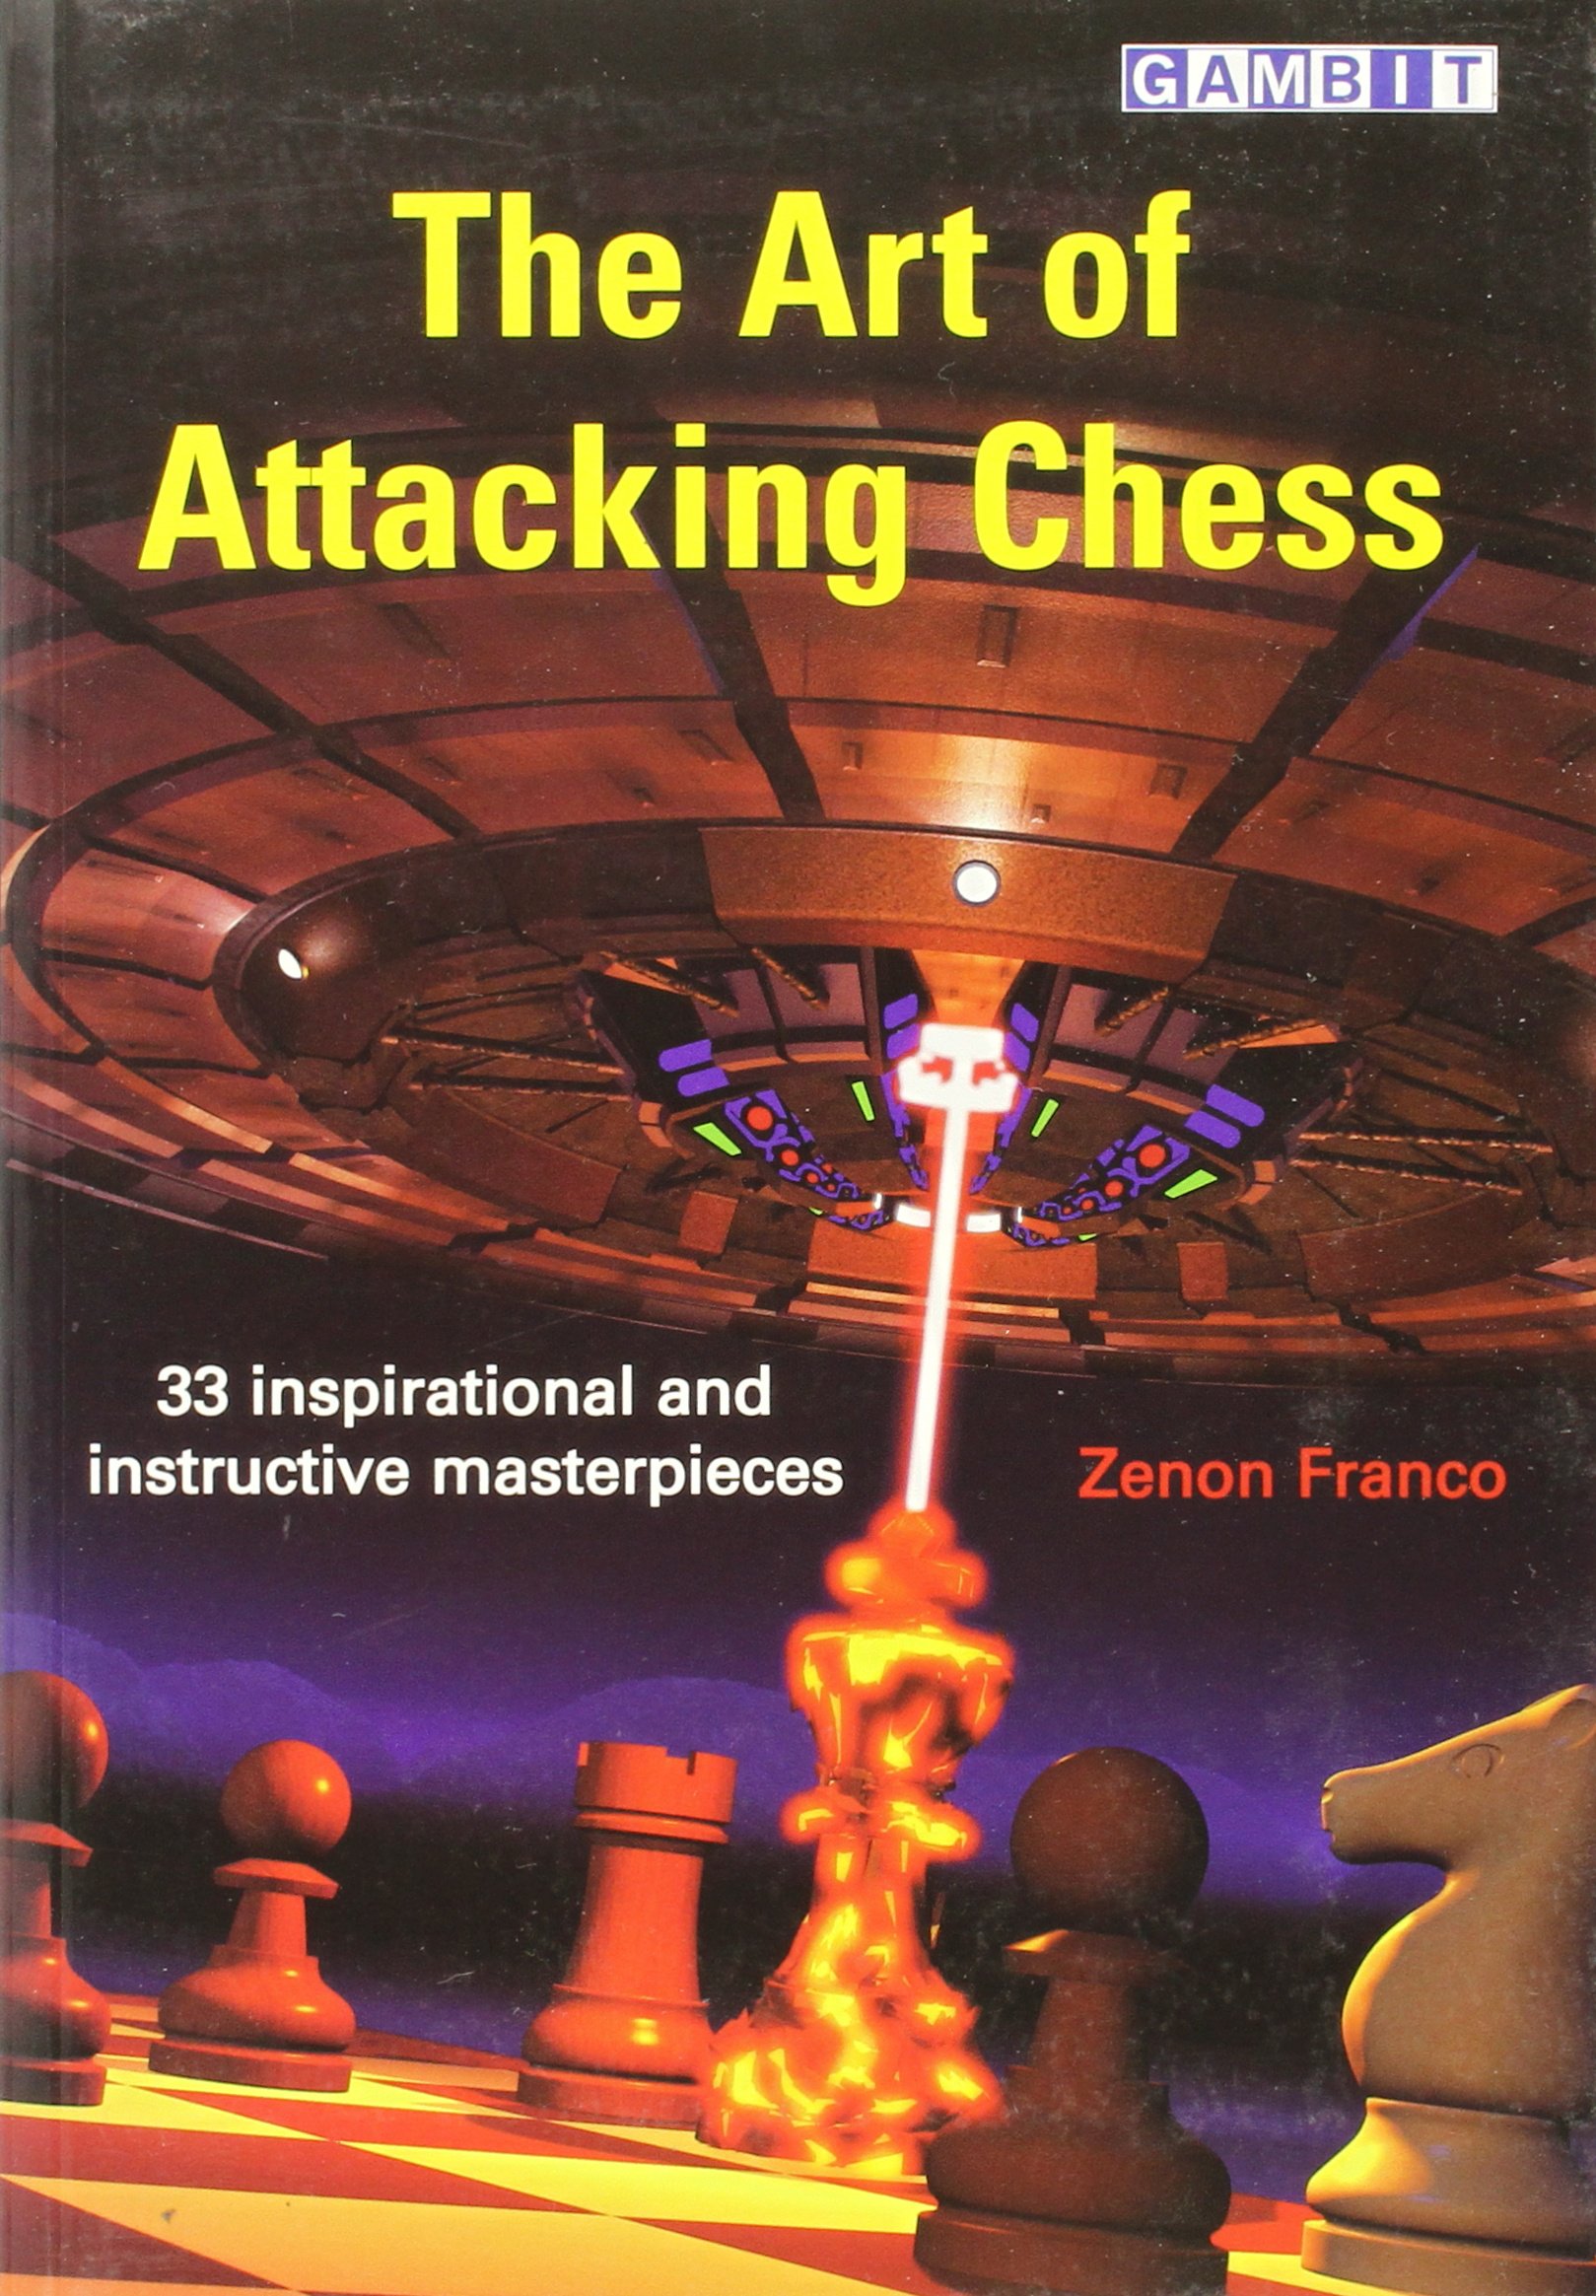 Franco: The Art of Attacking Chess